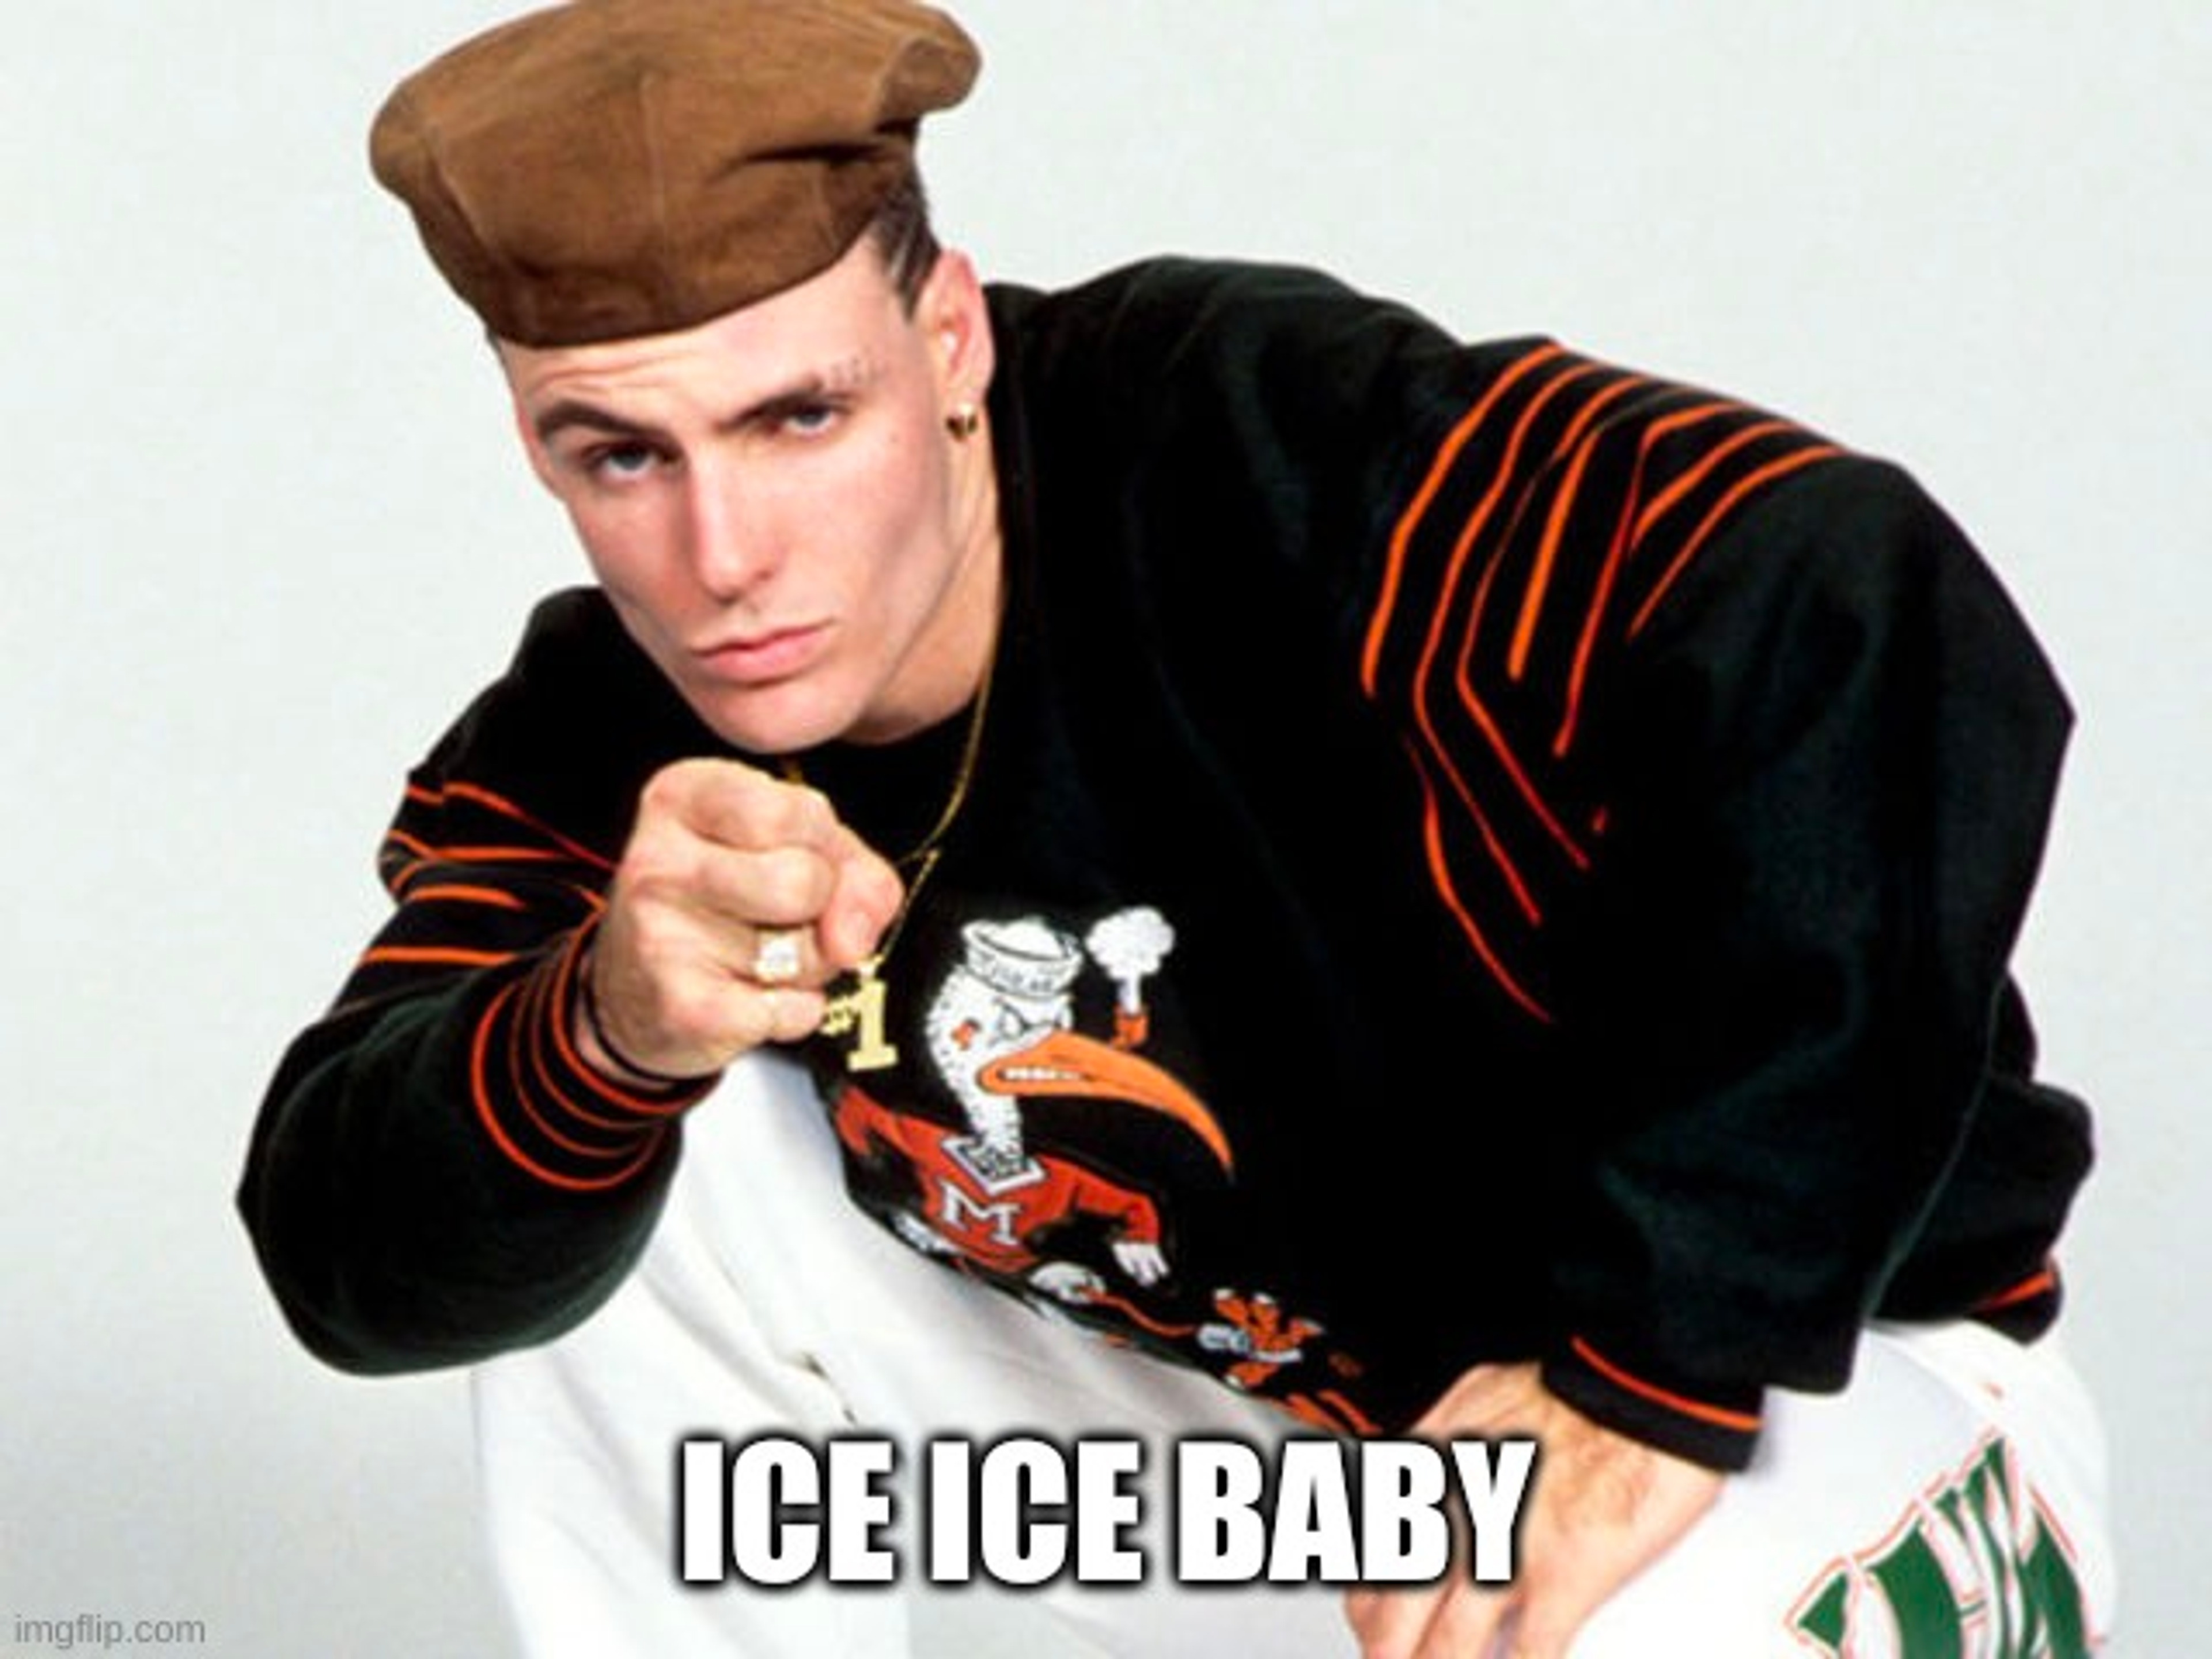 An image of Vanilla Ice with the text "Ice Ice Baby"